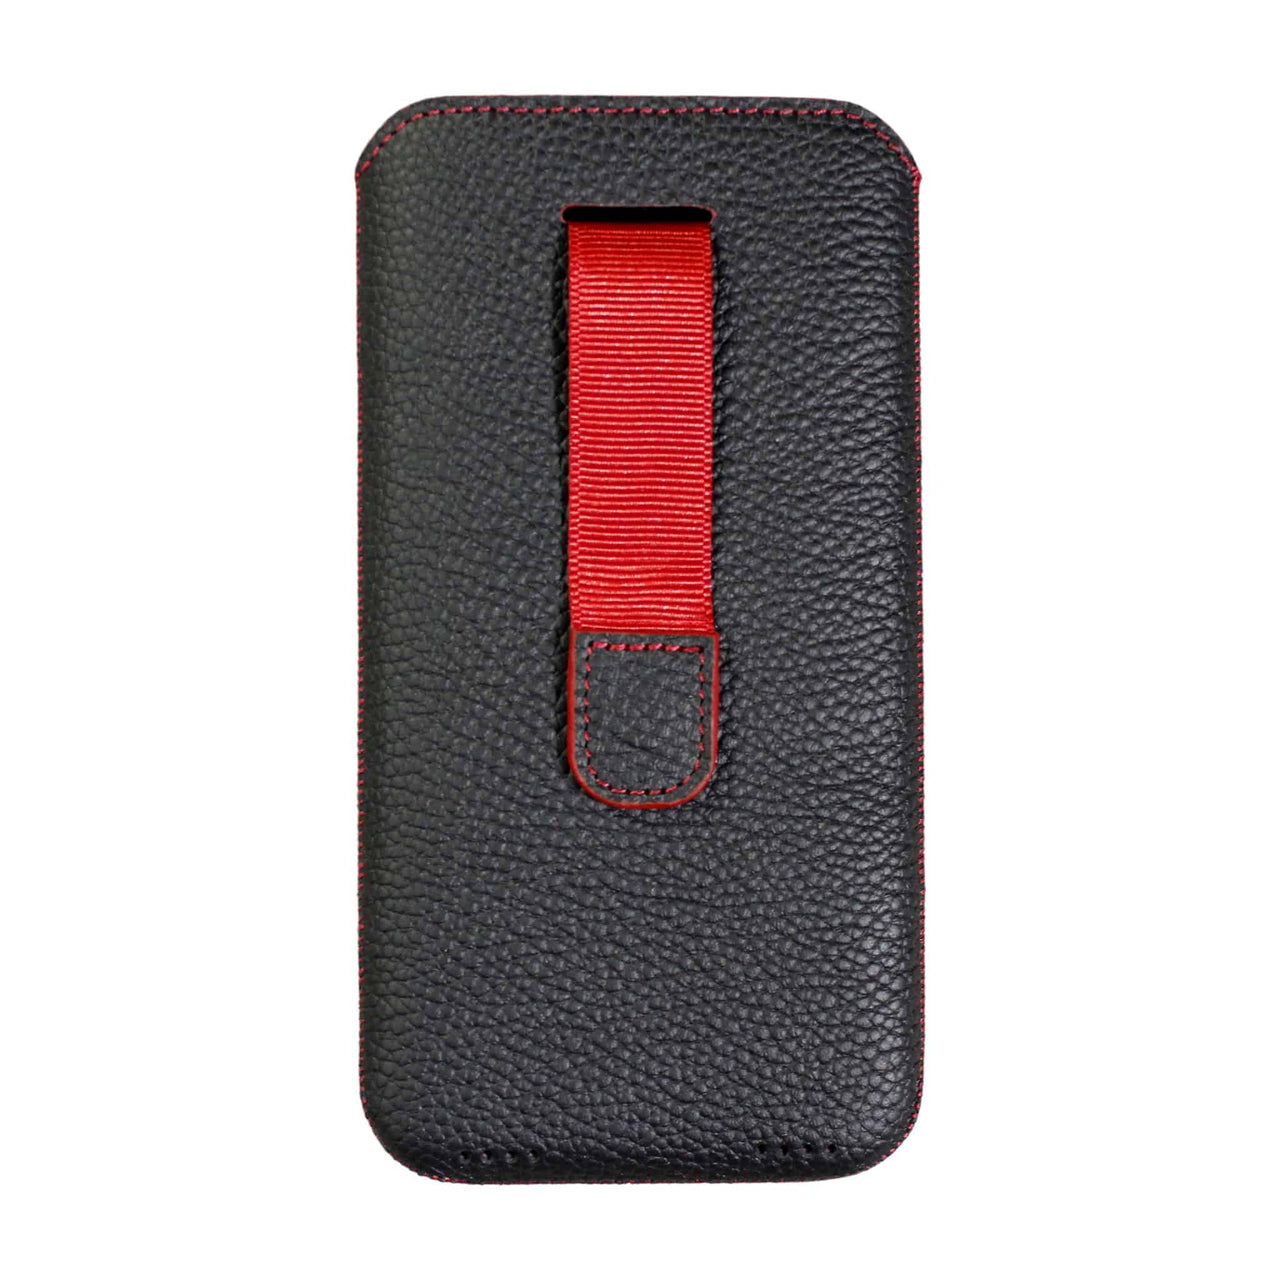 Samsung Galaxy S21 Ultra Genuine Leather Pouch Sleeve Case | Artisanpouch